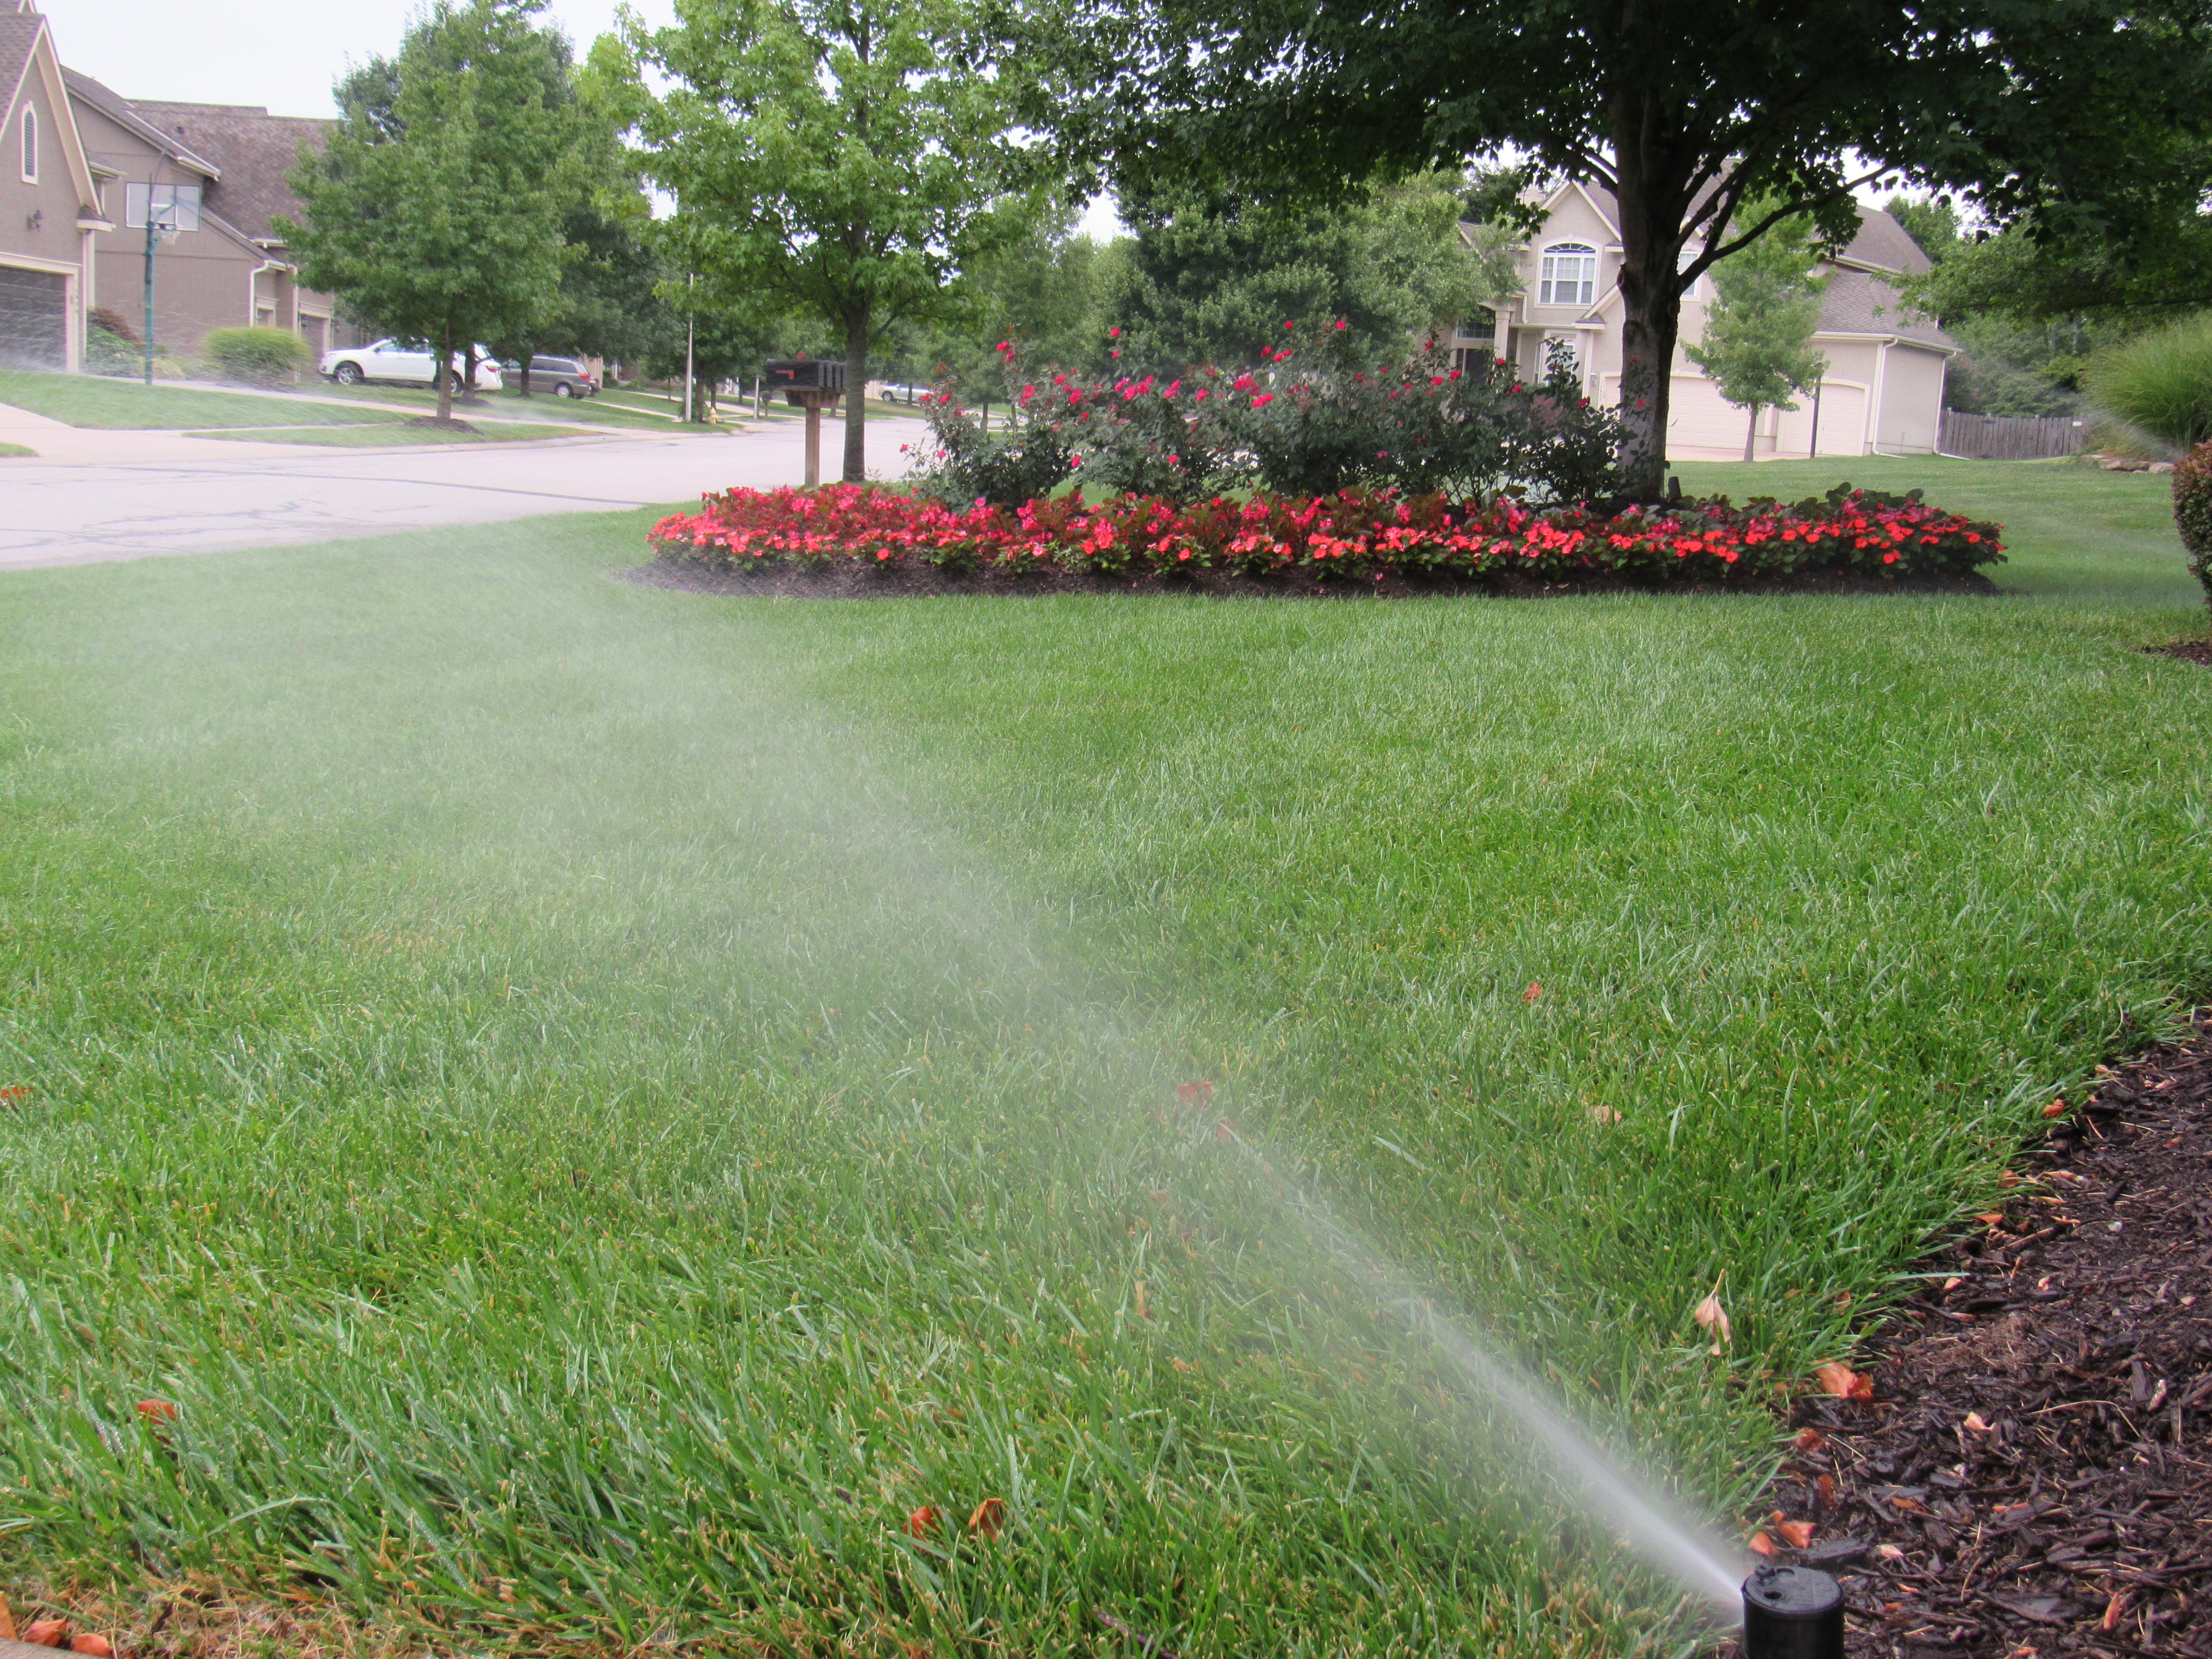 Lawn care services in Overland Park Irrigation system service Irrigation system repair Custom turf applications